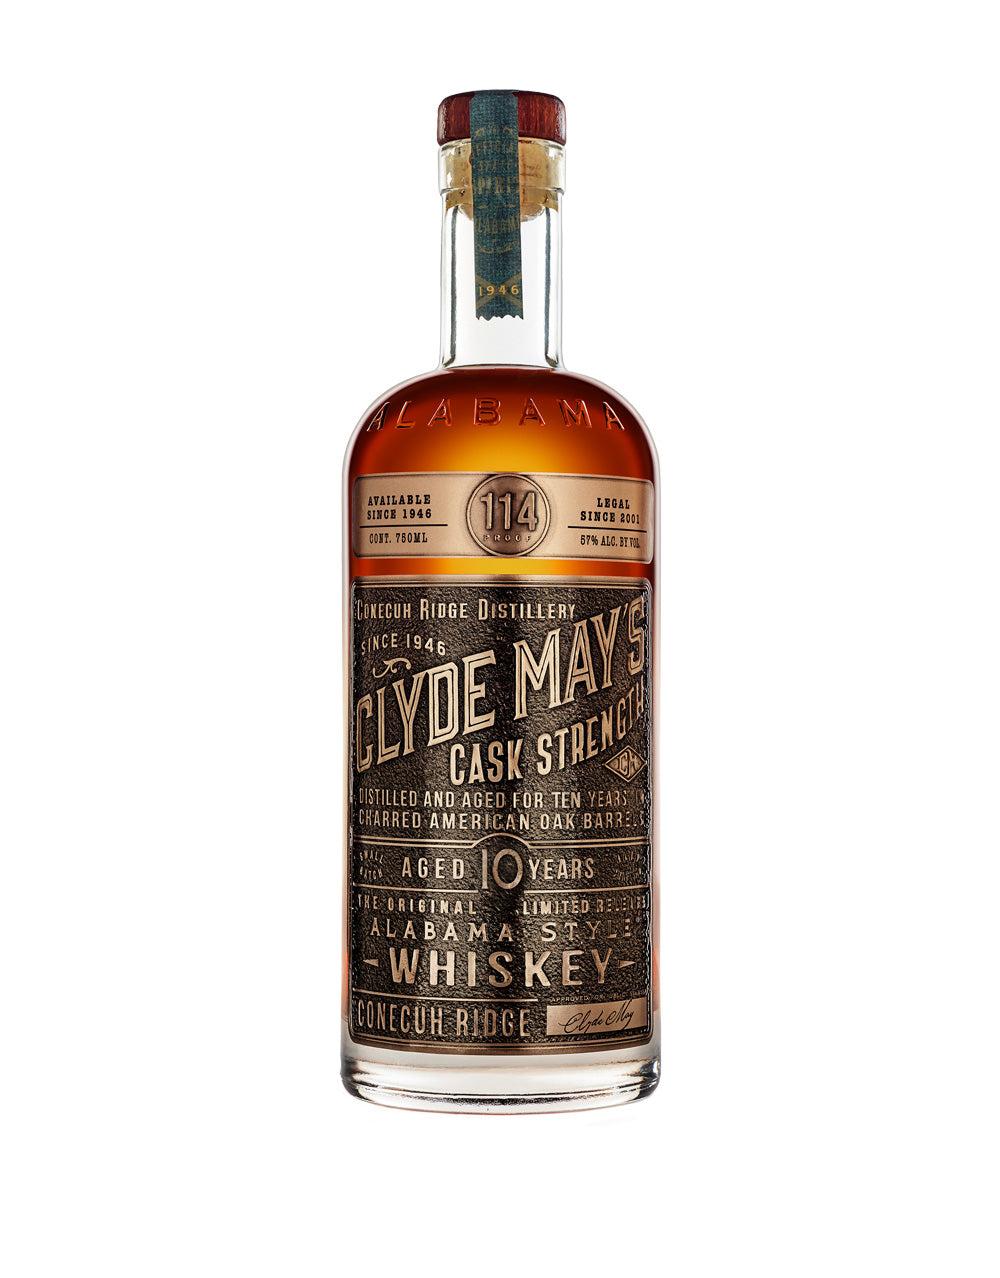 Clyde May’s Cask Strength Alabama Style Whiskey